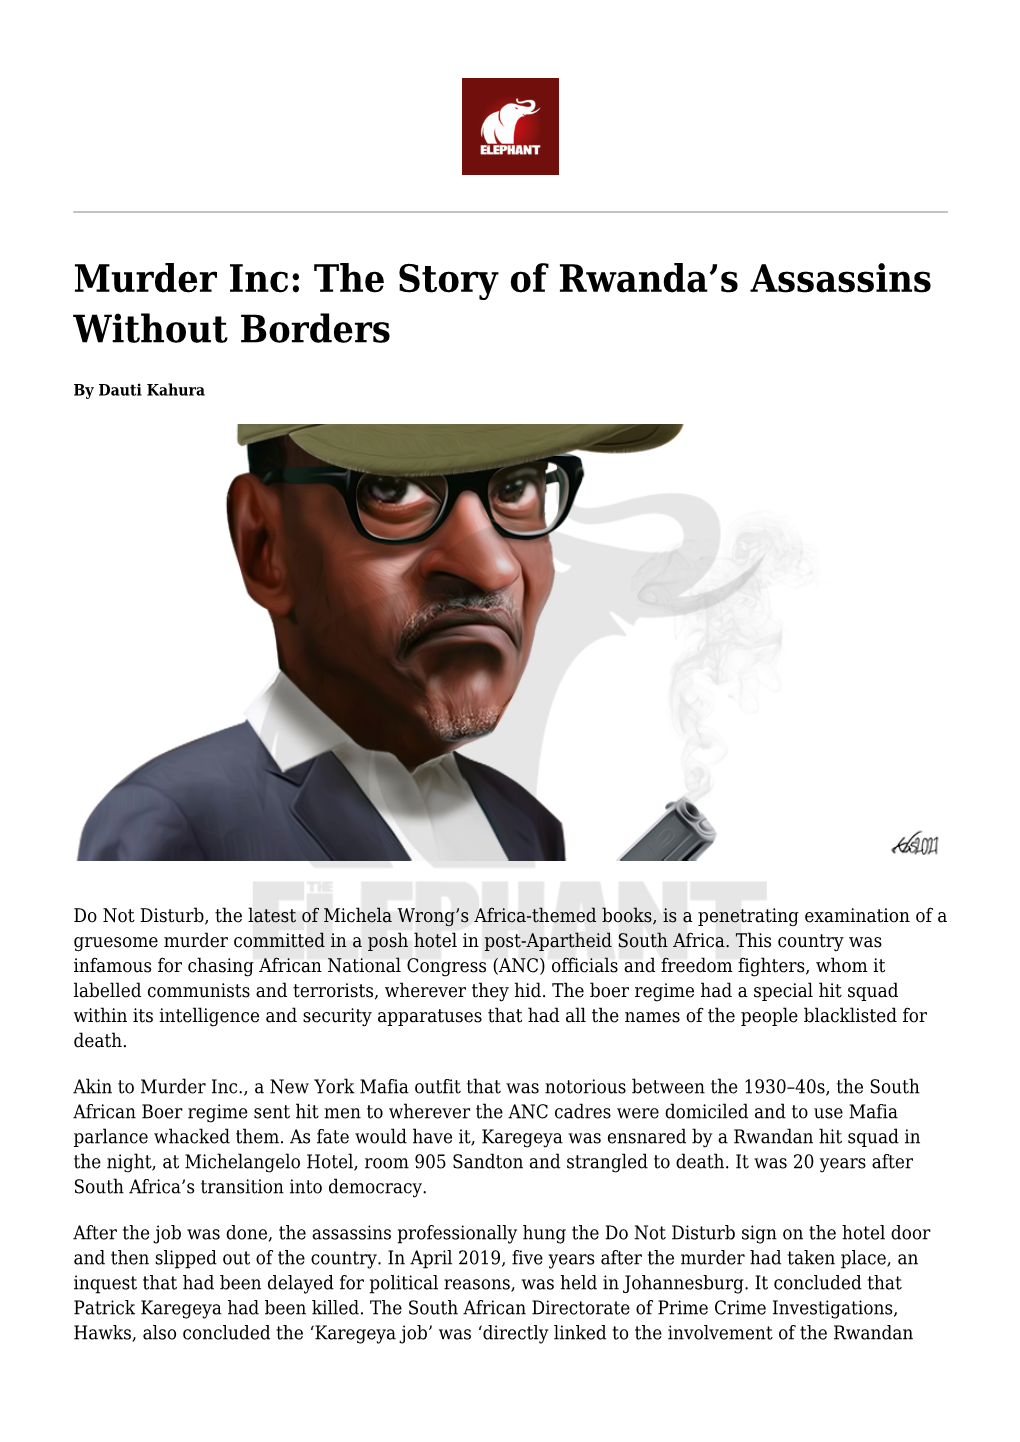 Murder Inc: the Story of Rwanda's Assassins Without Borders,France